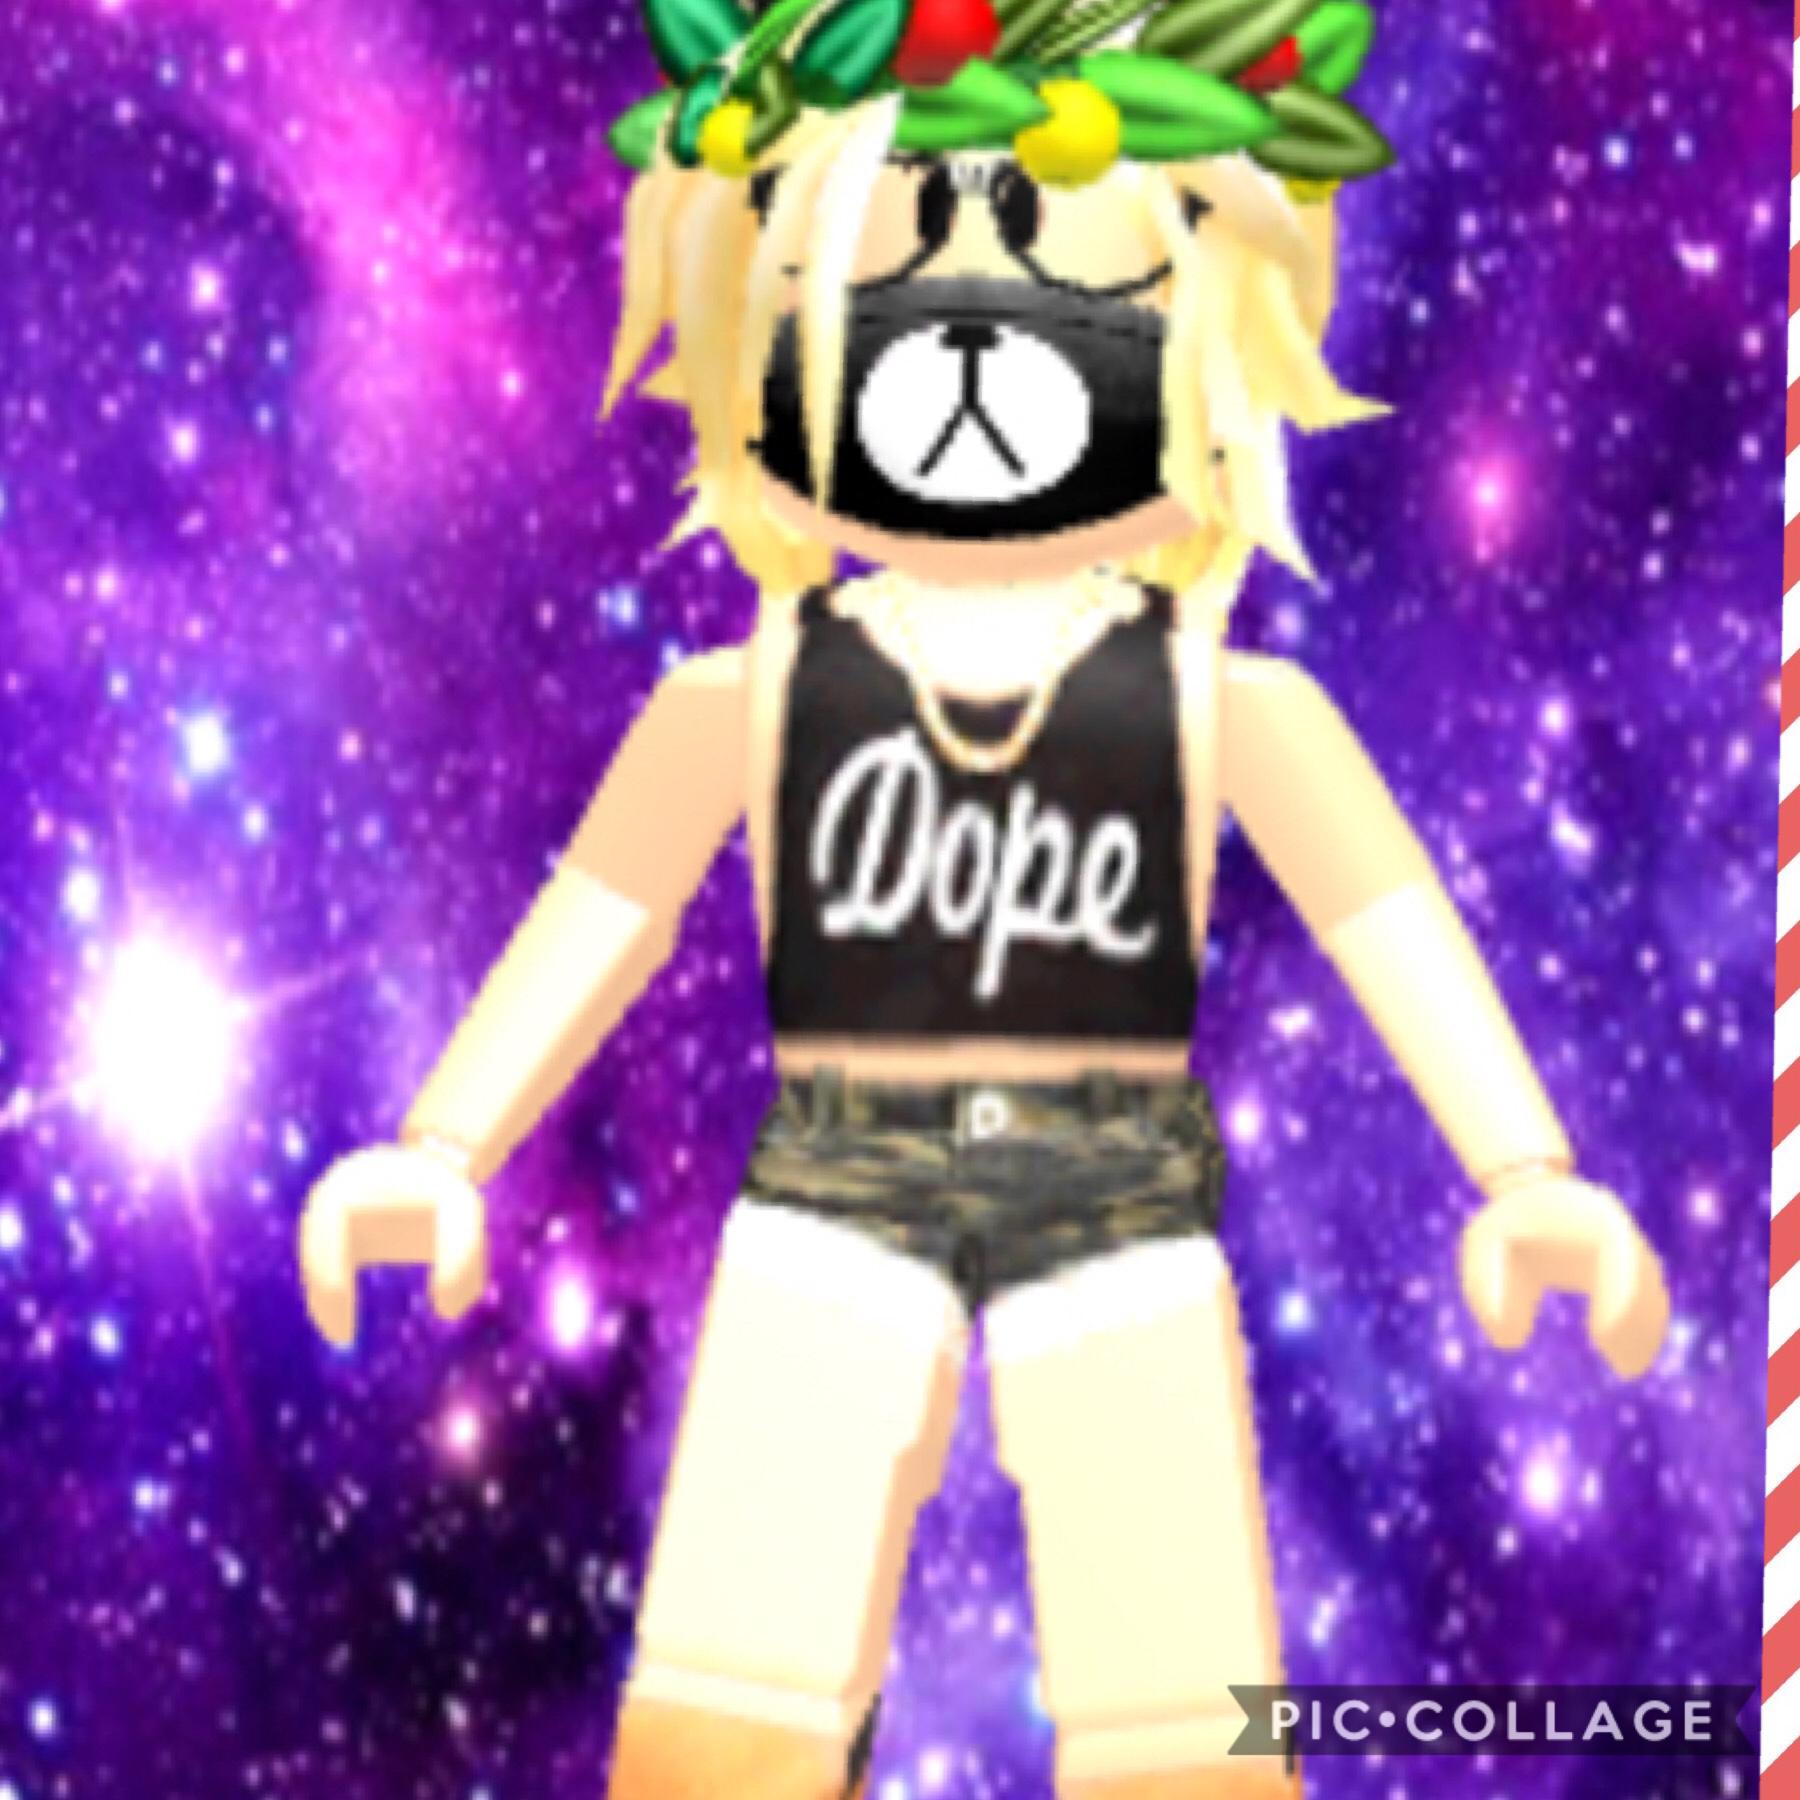 If you know what ROBLOX is this is my future avatar 